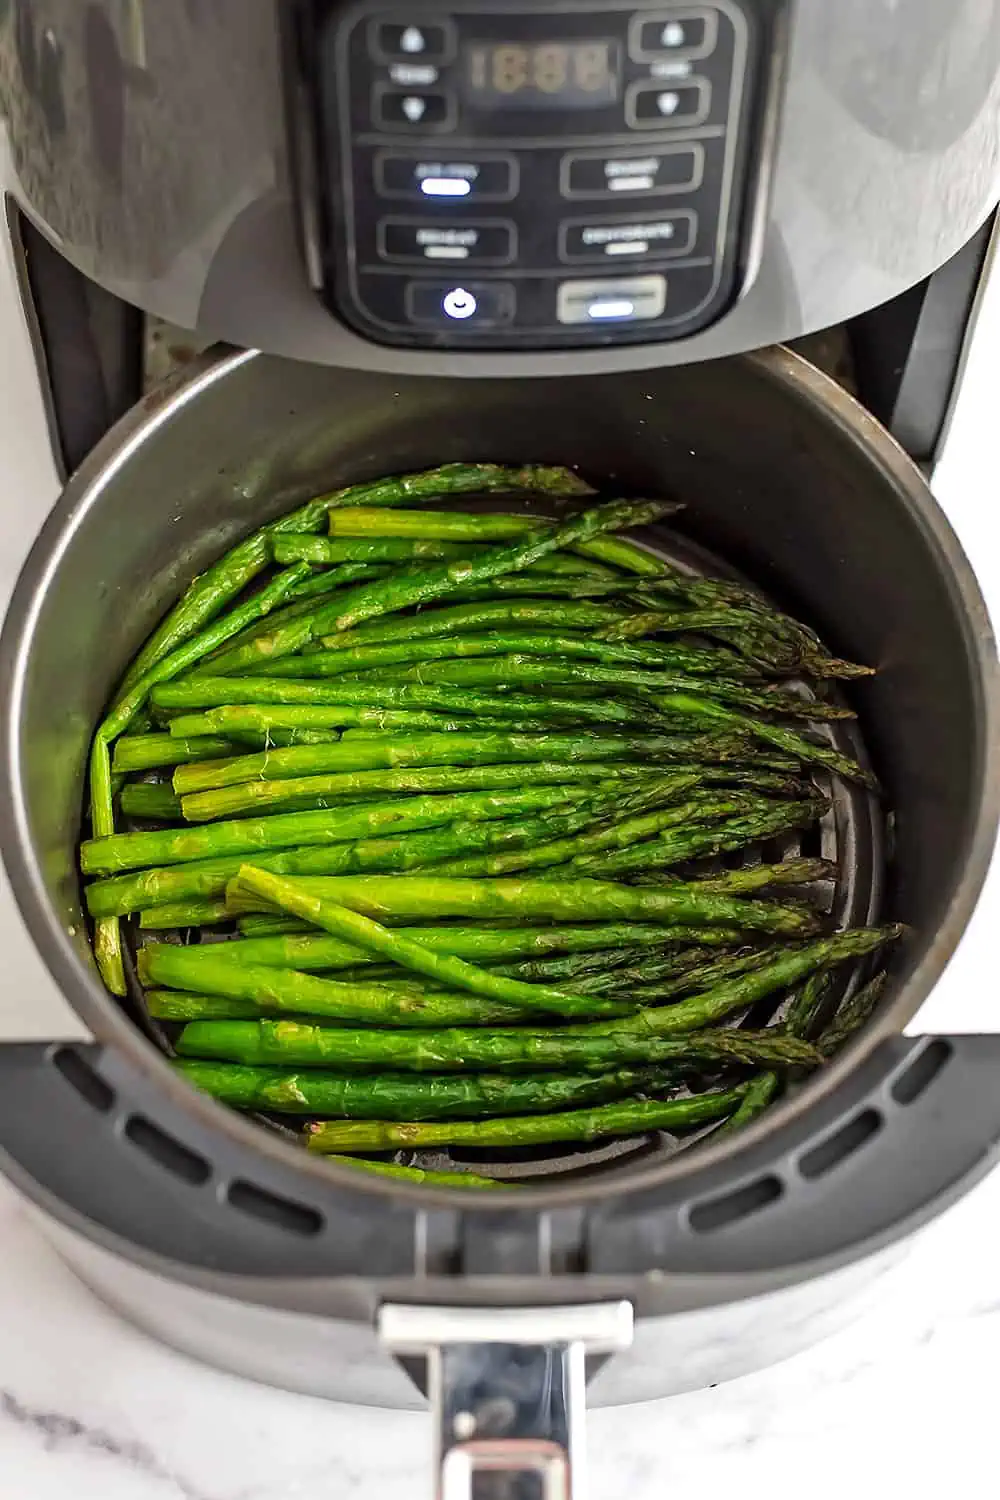 Cooked frozen asparagus in an air fryer basket.